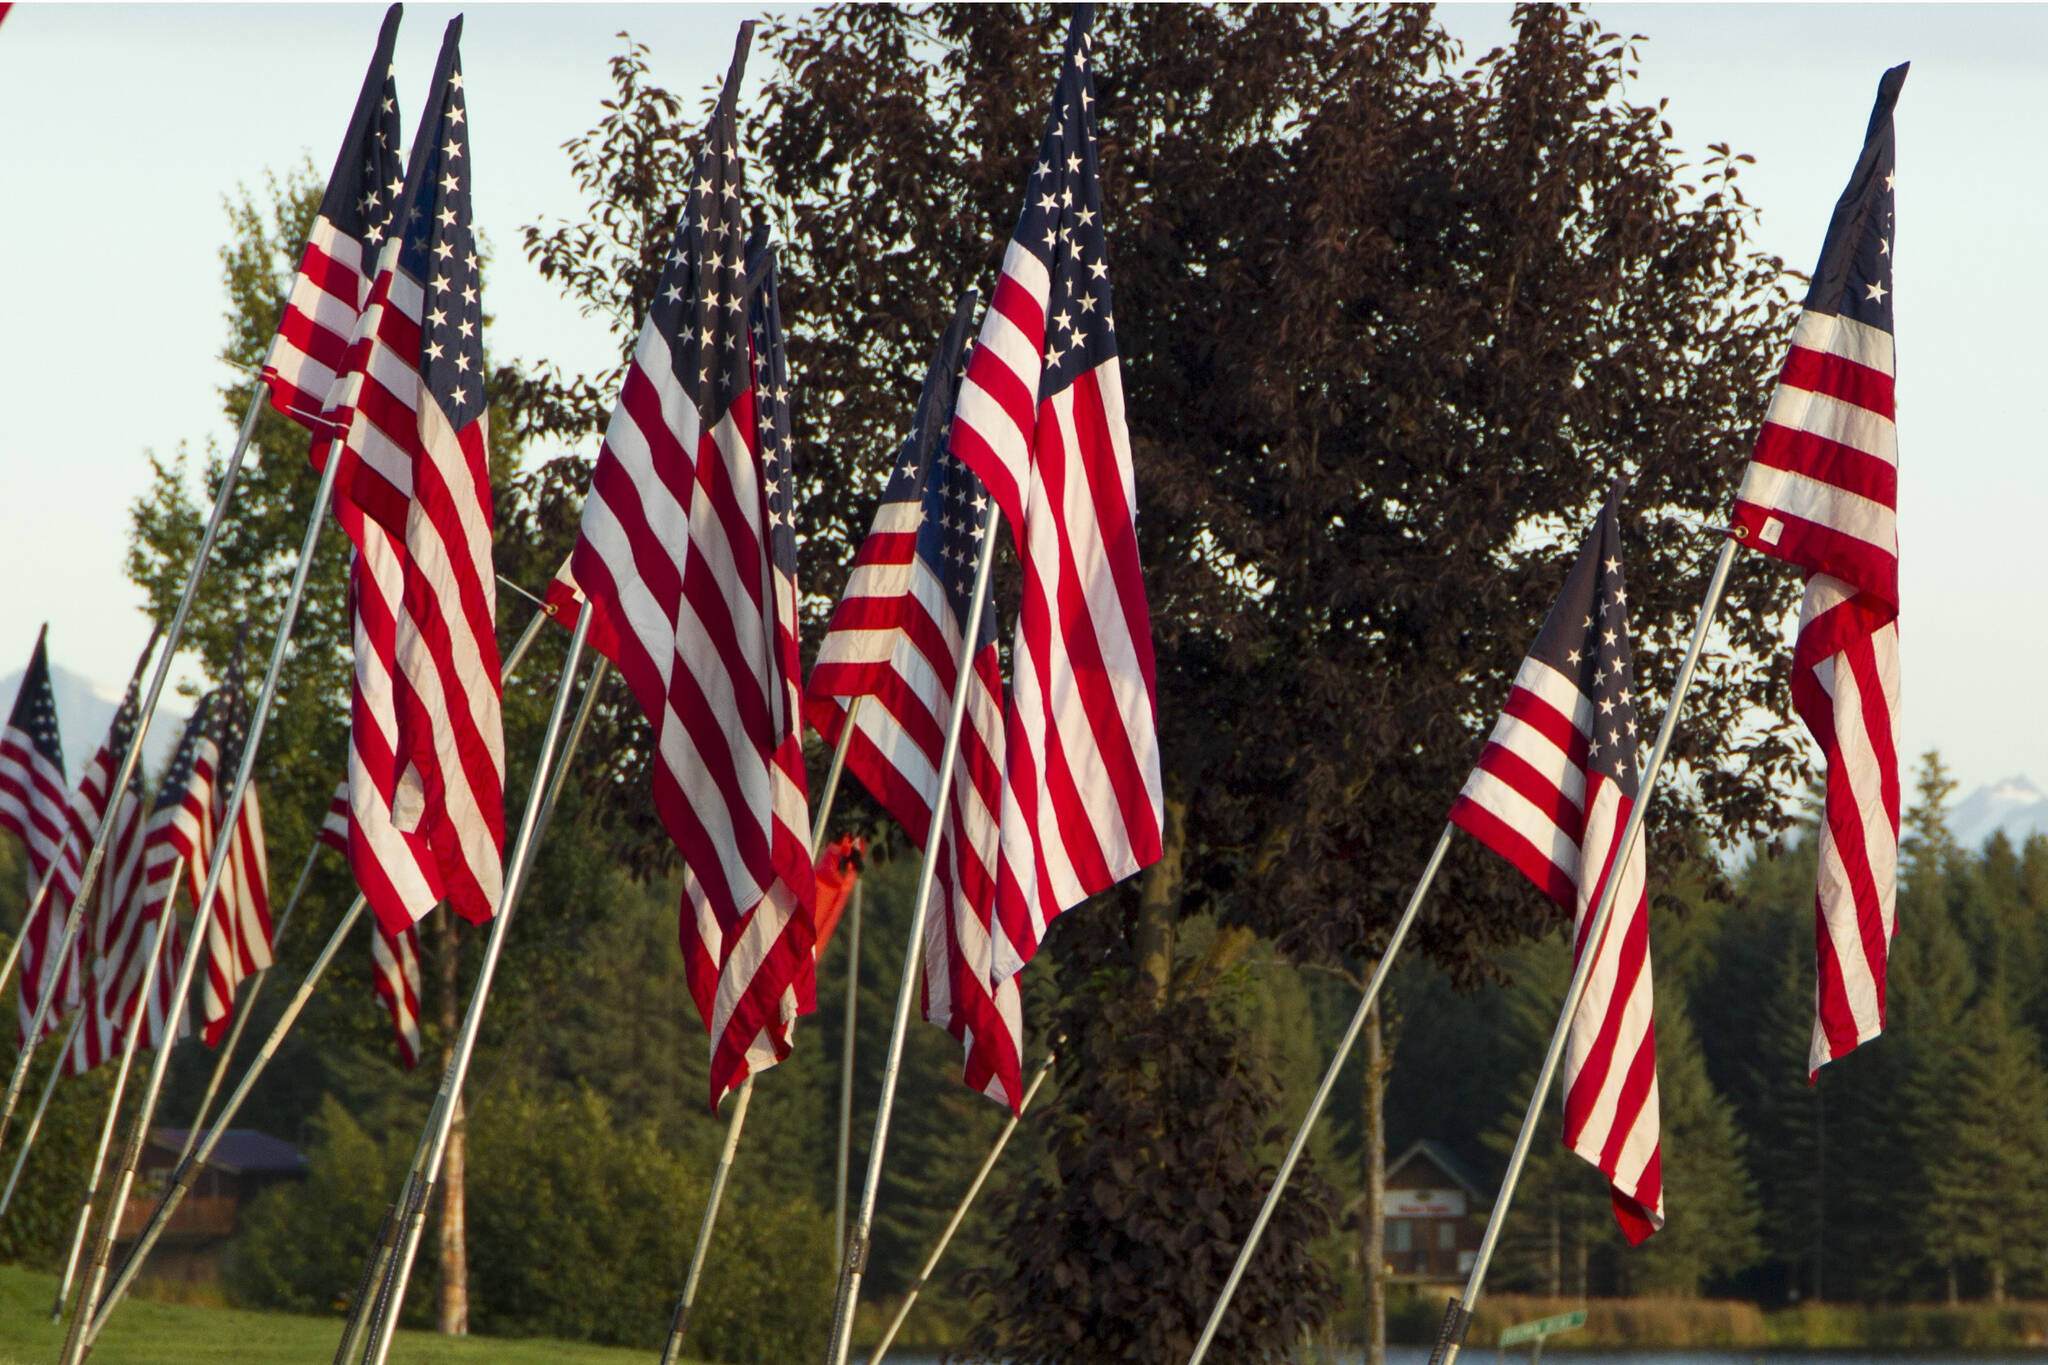 The Homer-Kachemak Bay Rotary and American Legion Post 16 placed flags in honor of the 2,996 people killed in the four terrorist attacks on Sept. 11, 2001, and the 13 service members killed in Afghanistan on Aug. 26, 2021. (Photo by Sarah Knapp/Homer News)